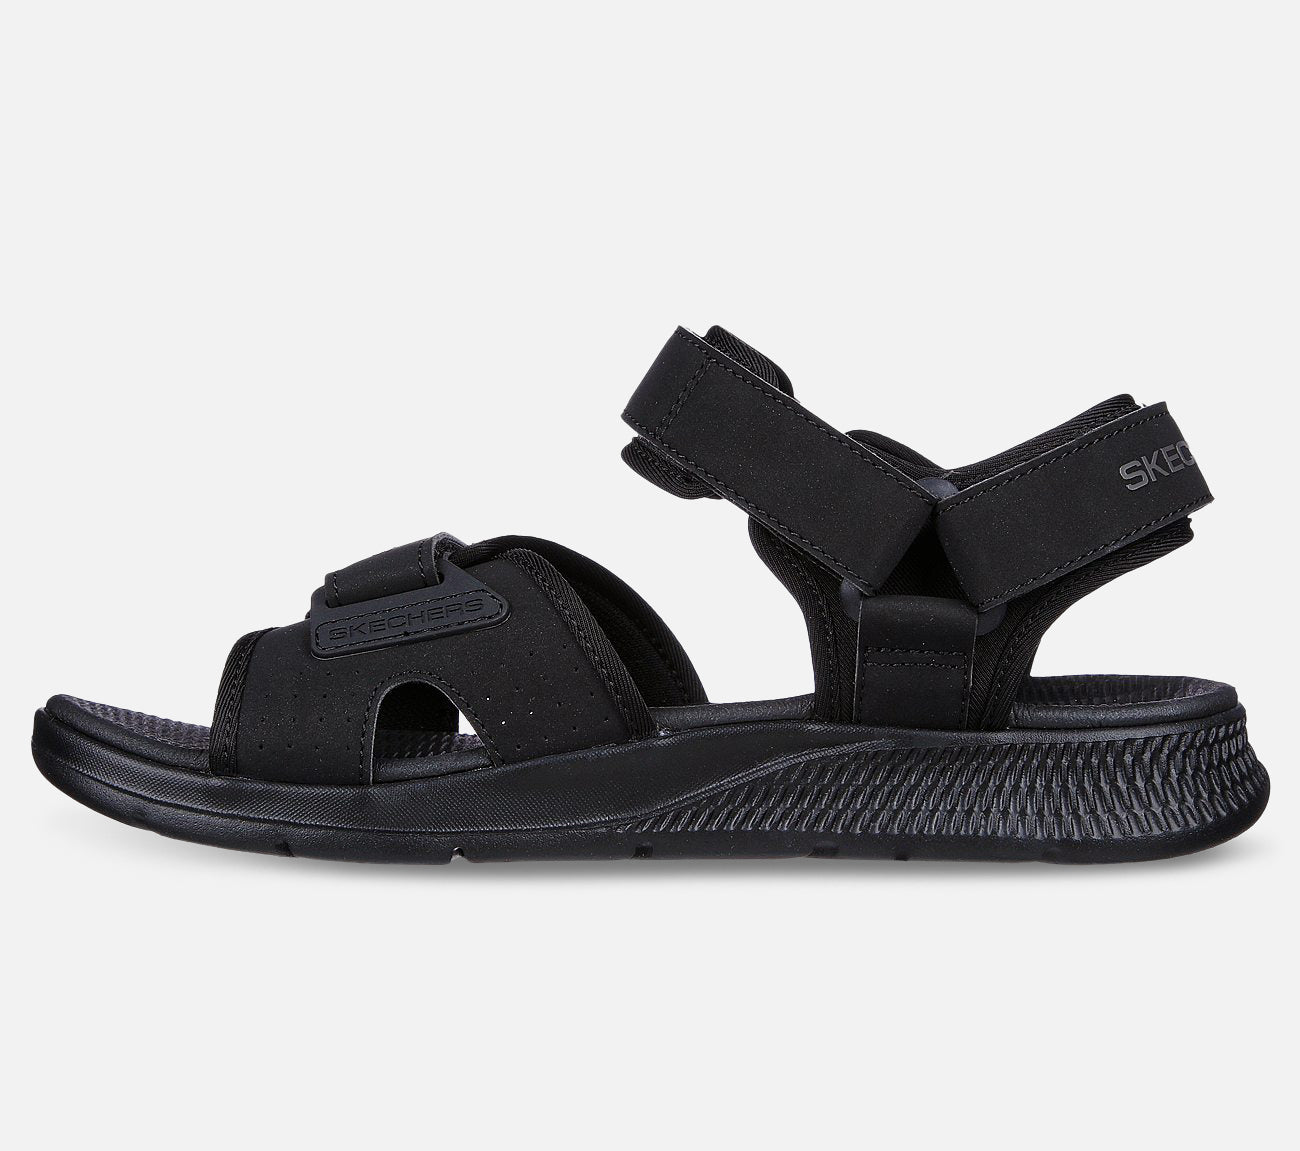 GO Consistent Sandal - Tributary